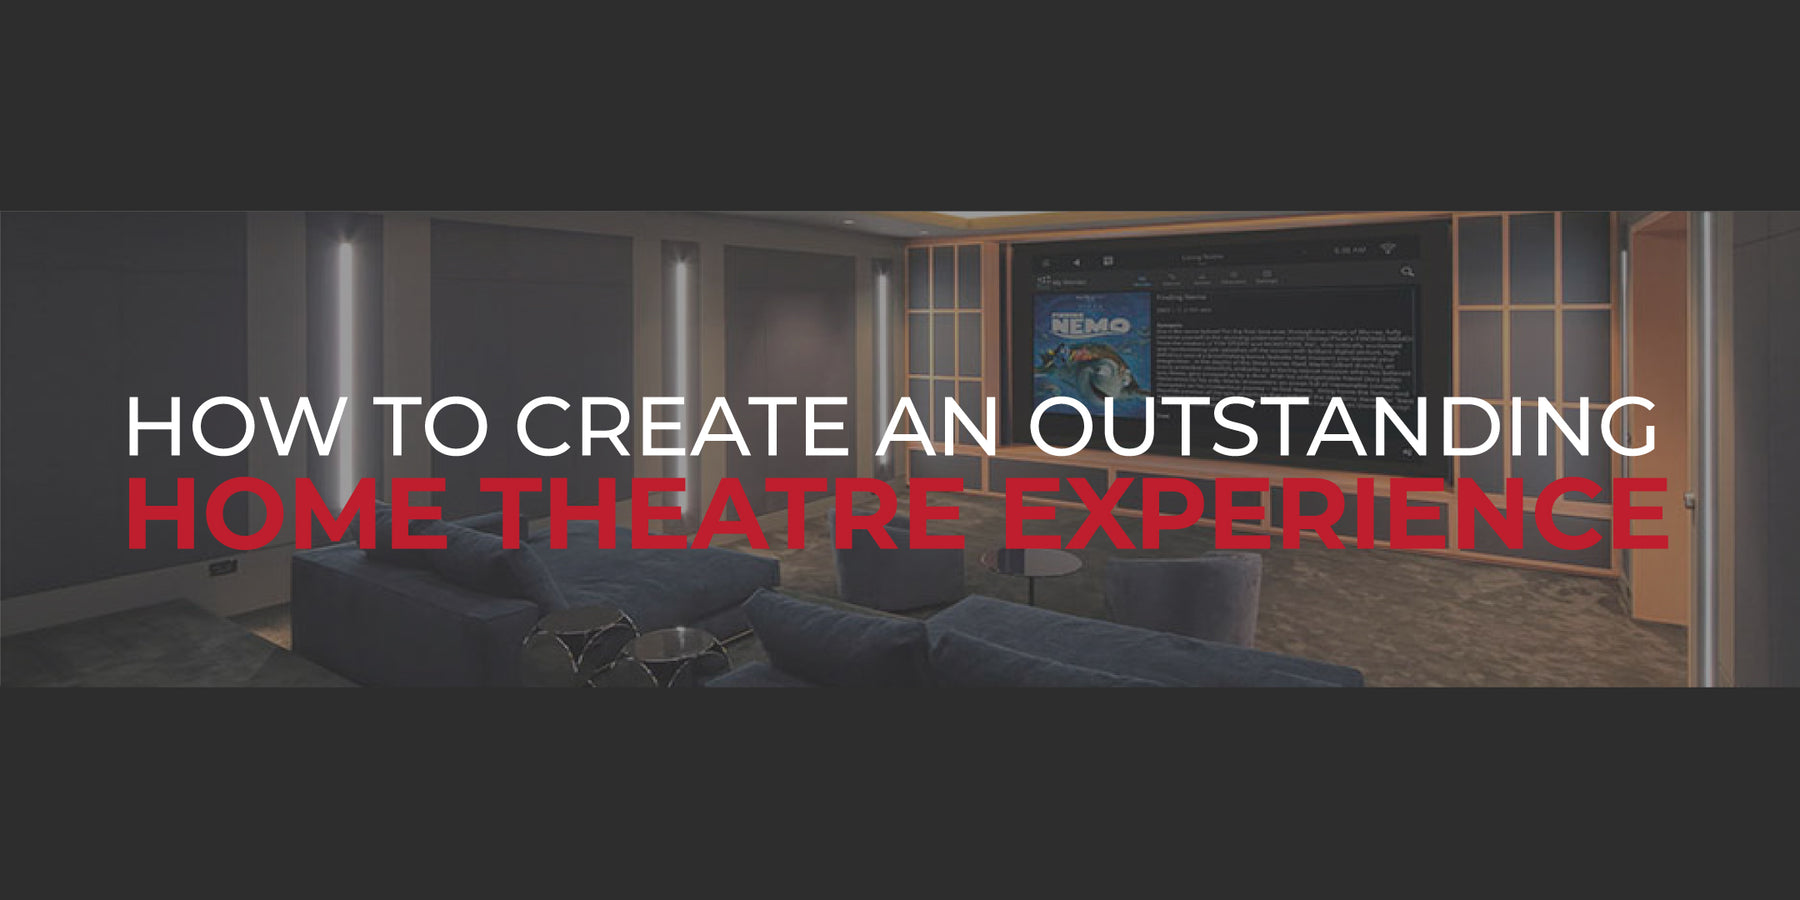 HOW TO CREATE AN OUTSTANDING HOME THEATRE EXPERIENCE